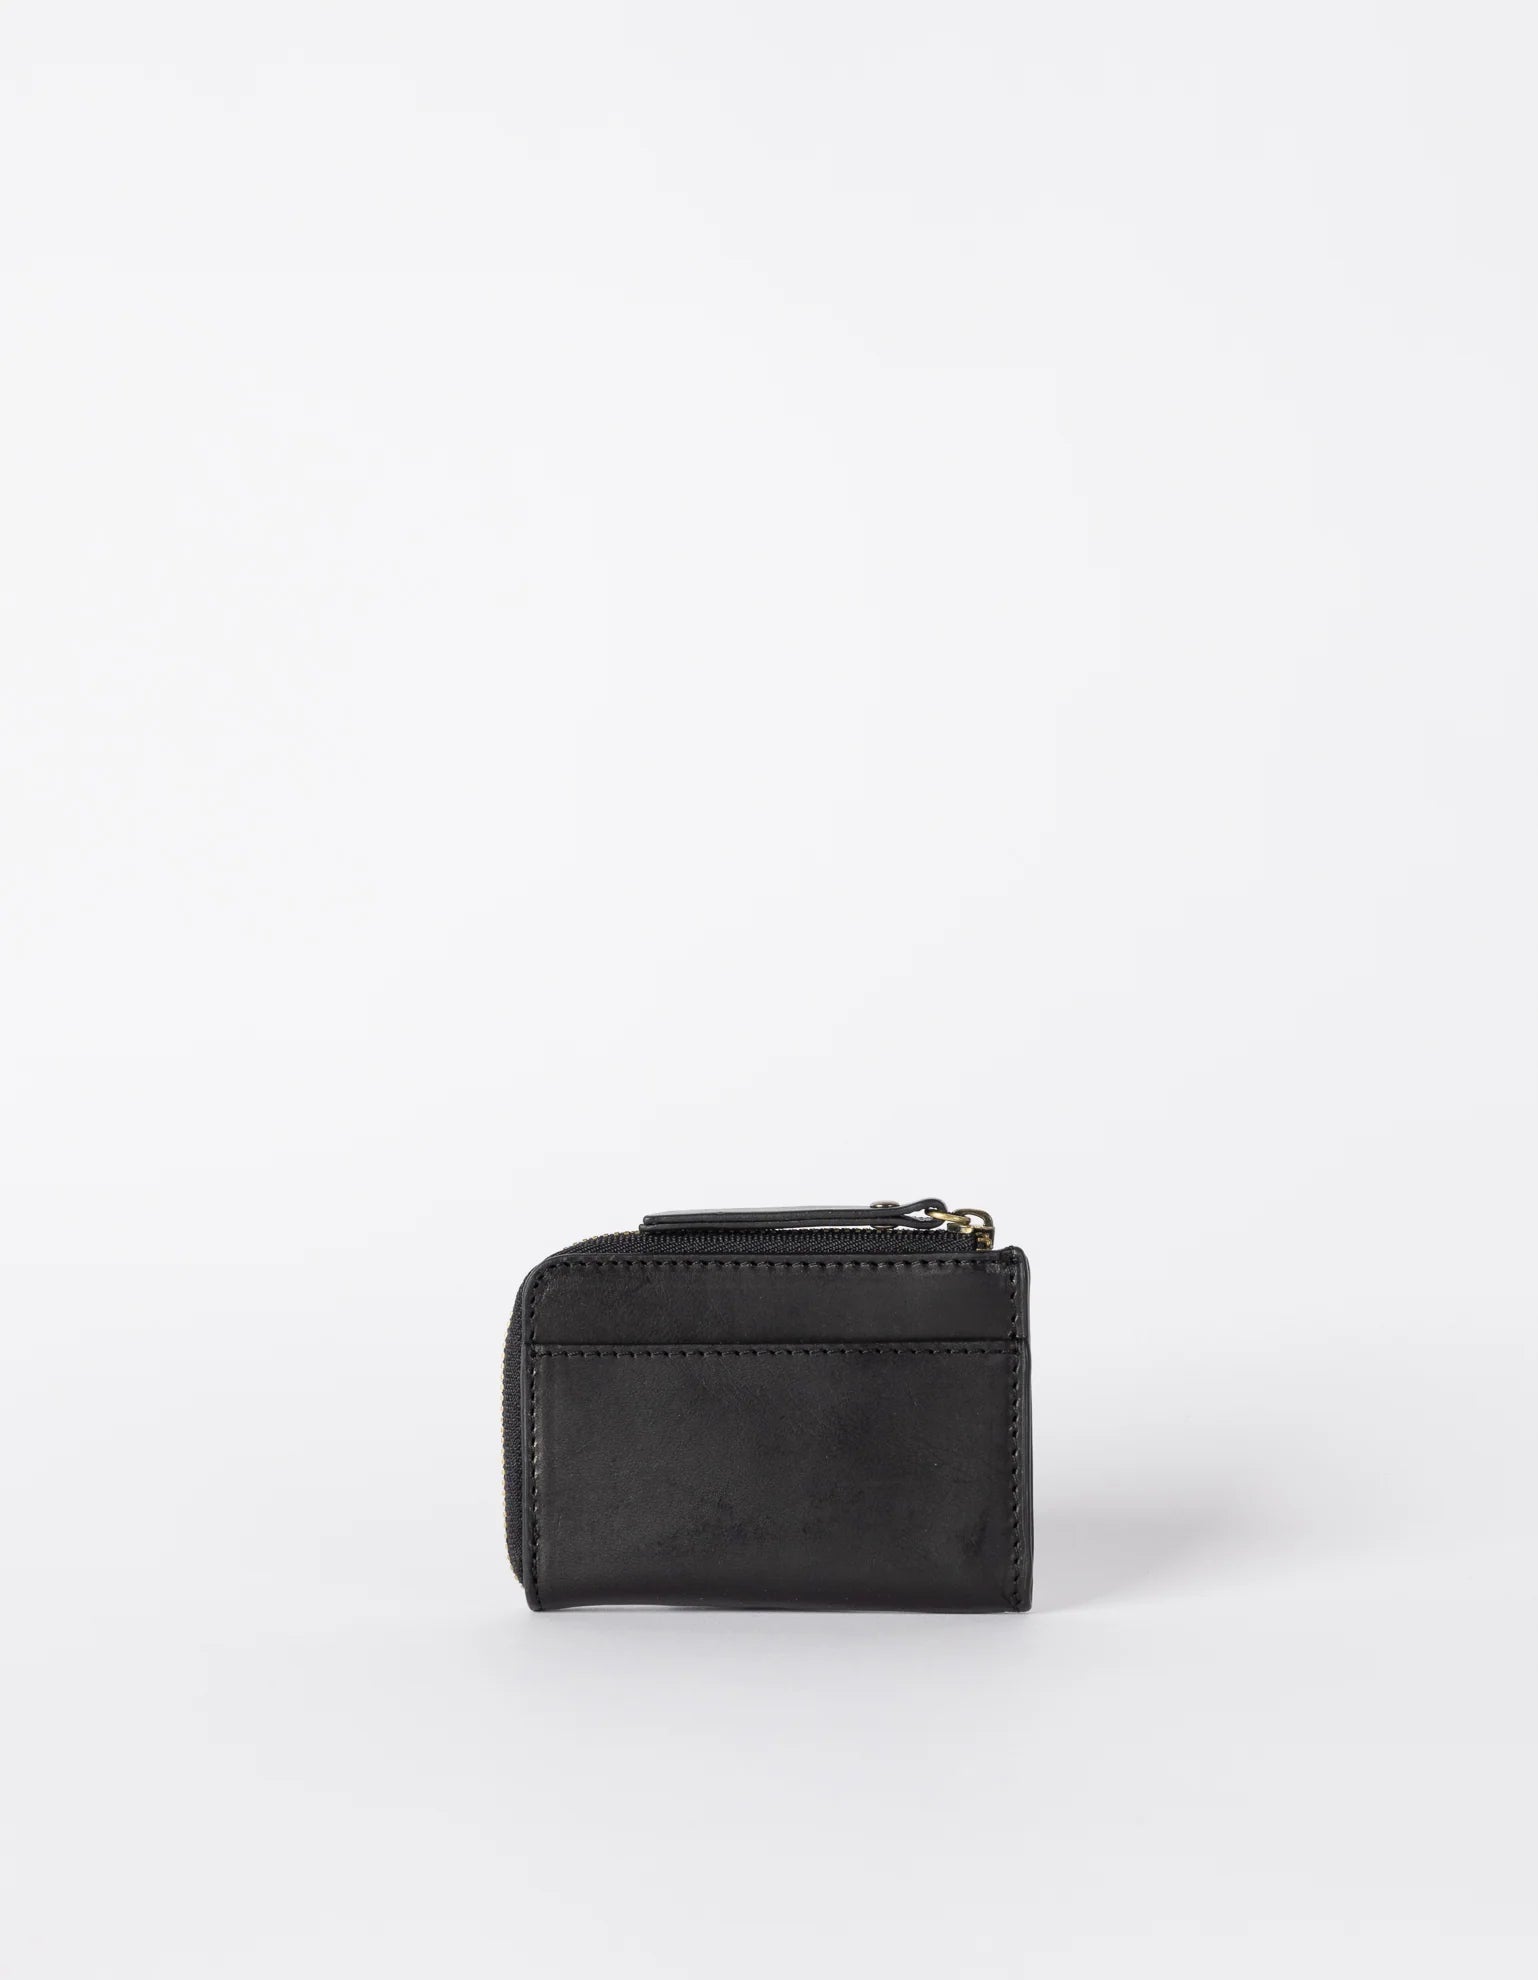 O MY BAG Coco Coin Purse Black Classic Leather